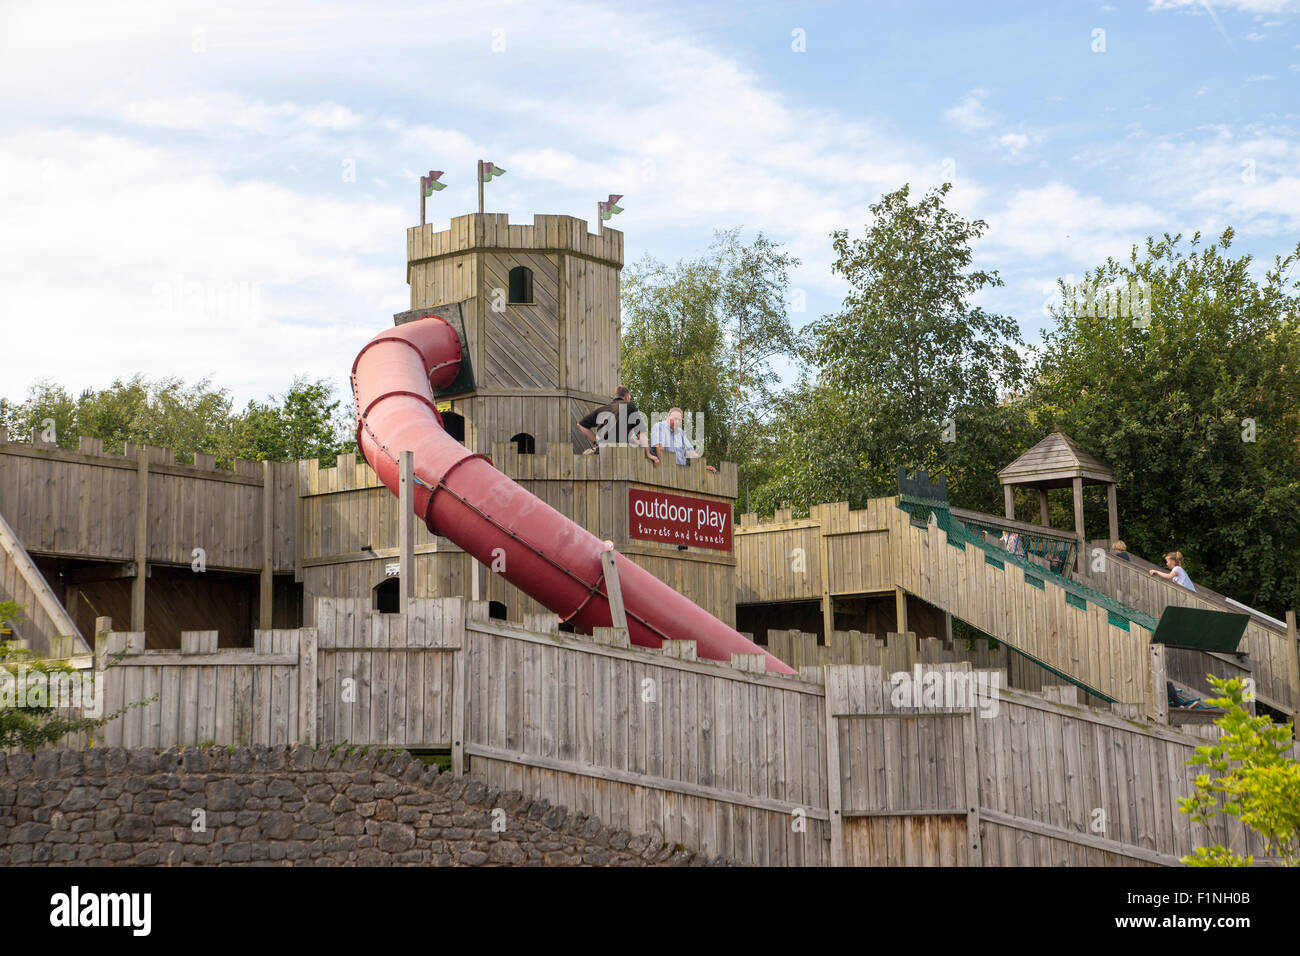 Large wooden outdoor adventure playground.  Castle themed playground with slides, climbing wall and swings Stock Photo